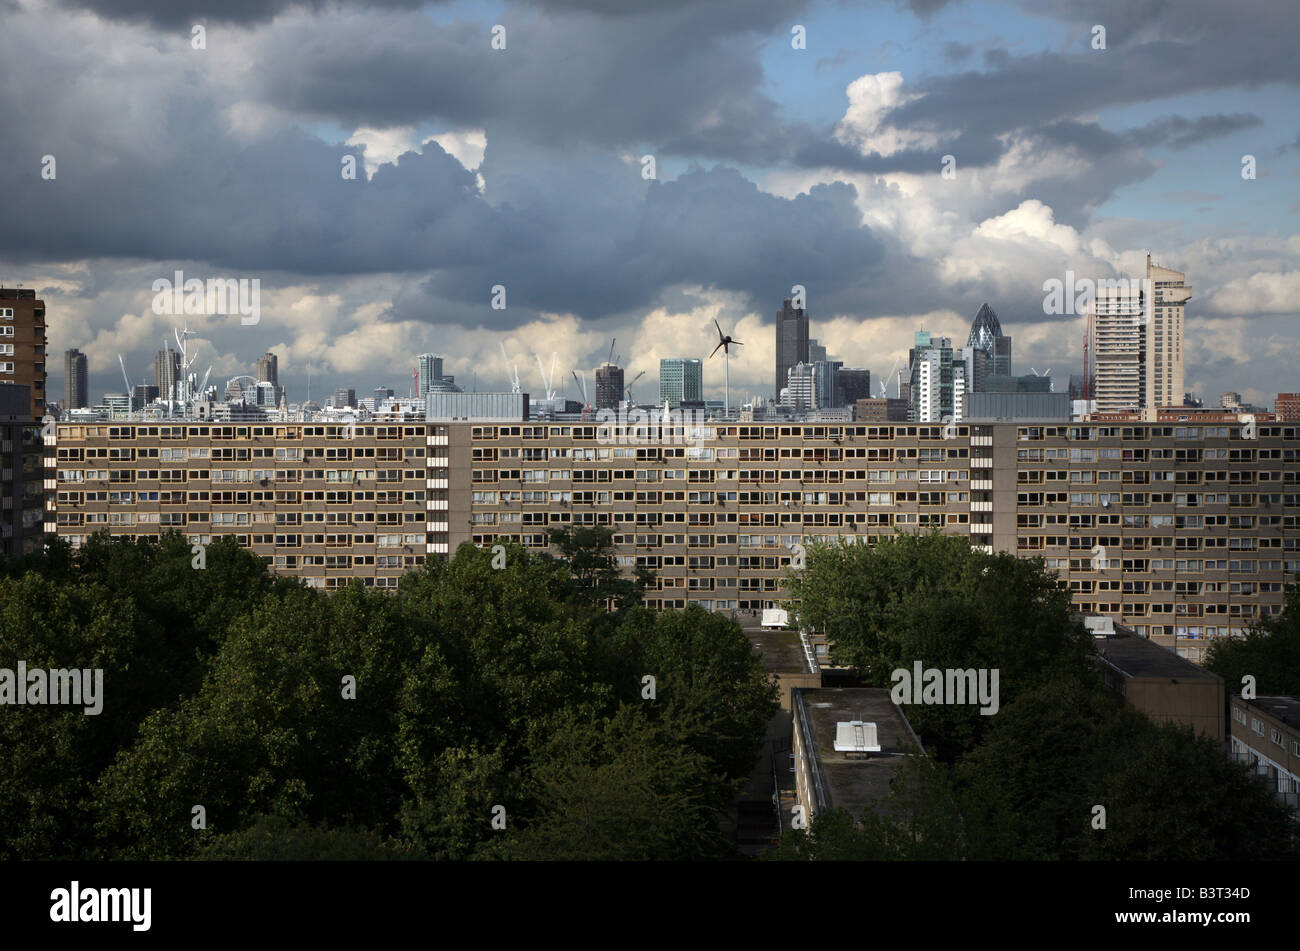 City of London skyline as seen from the Heygate Estate, Elephant & Castle, London. Stock Photo